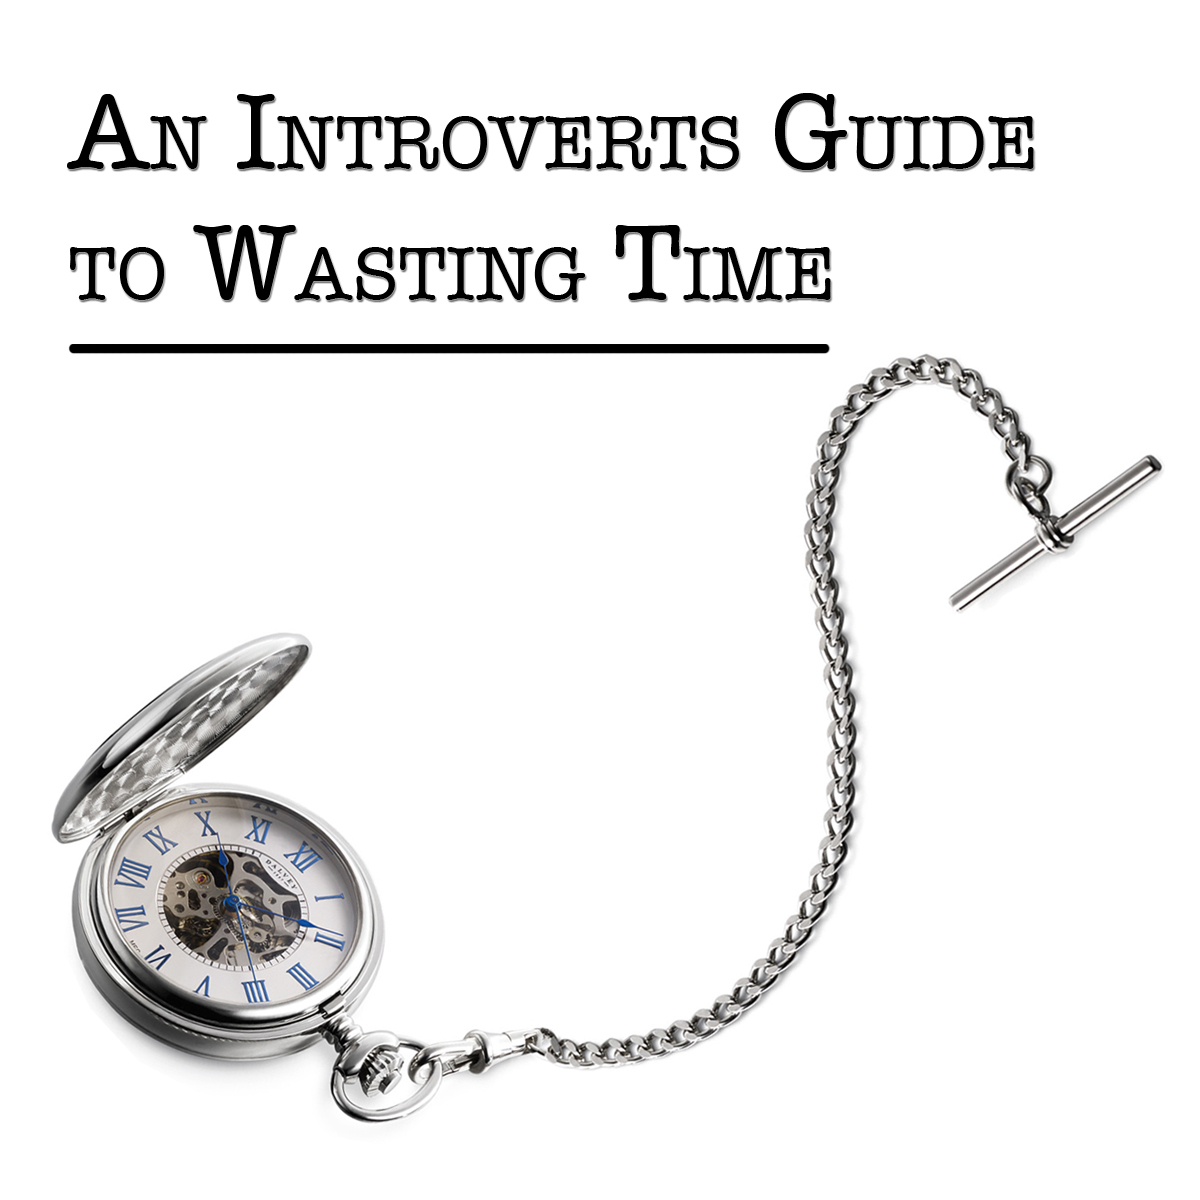 An Introverts Guide to Wasting Time: Episode 3